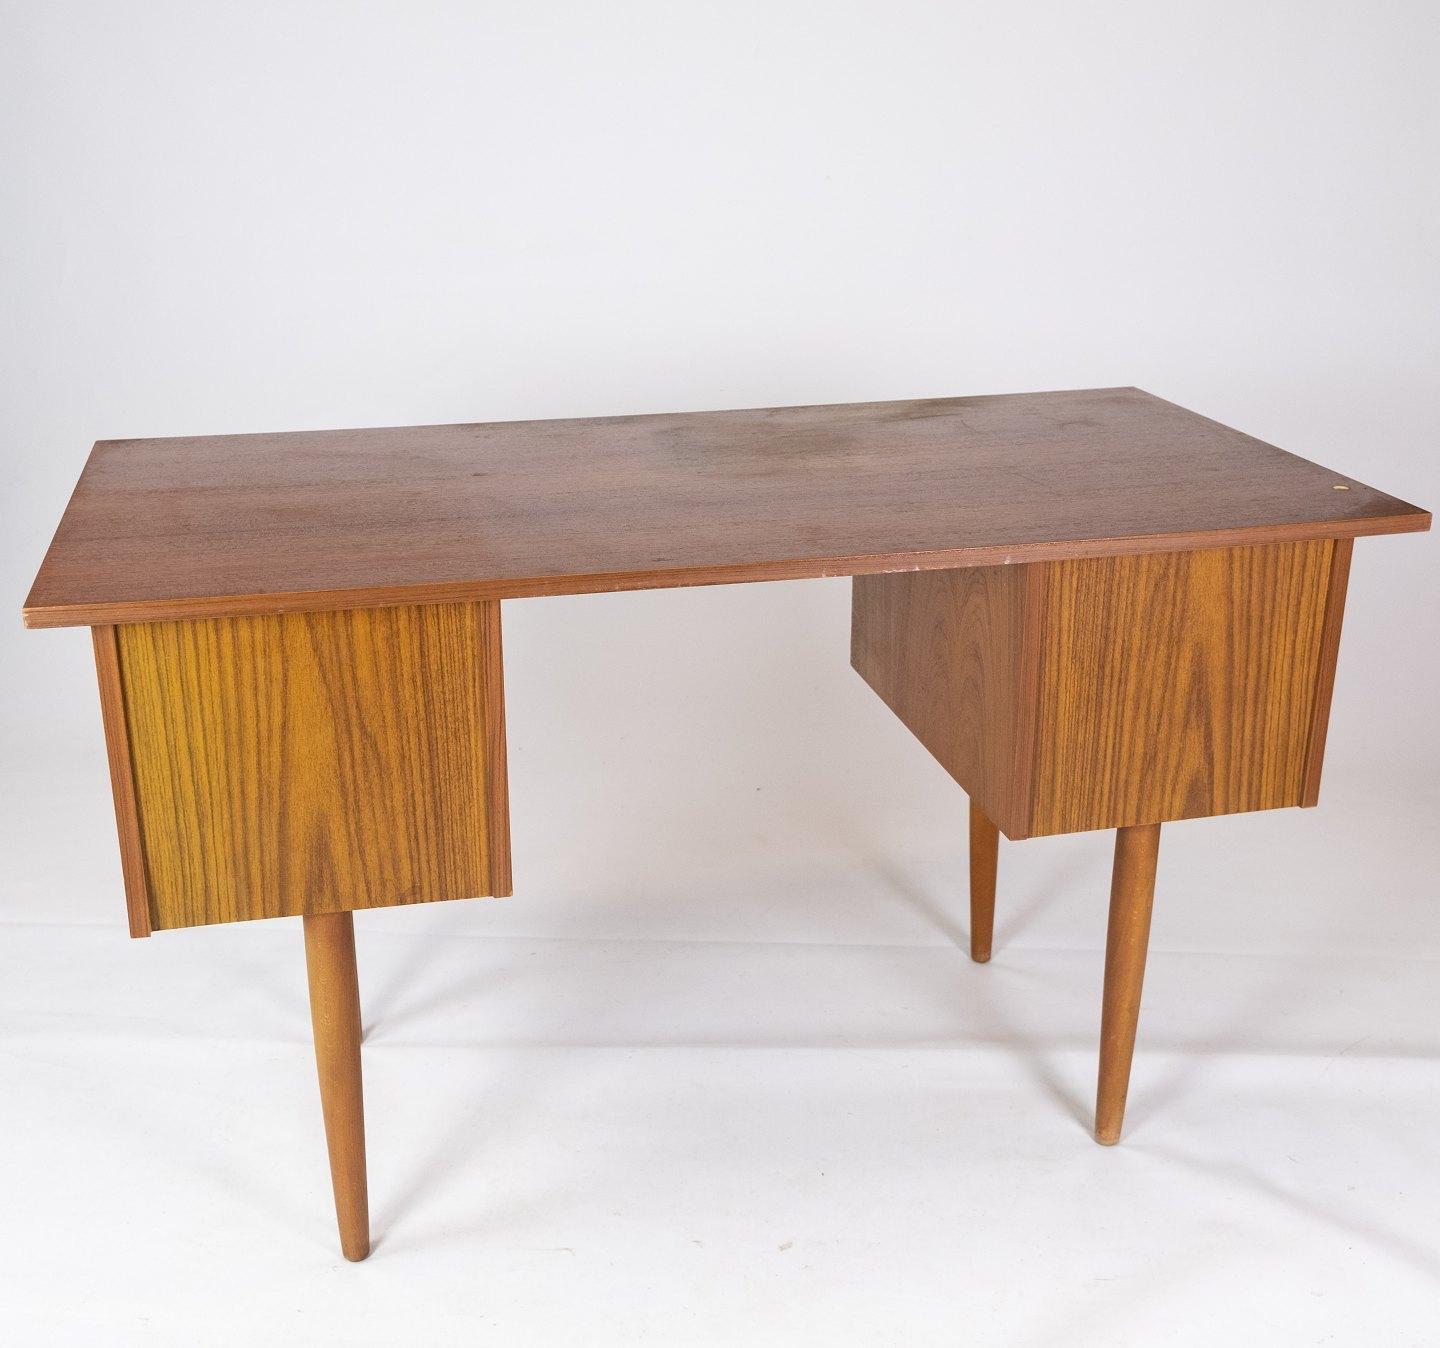 Mid-20th Century Desk Made In Teak, Danish Design From 1960s For Sale